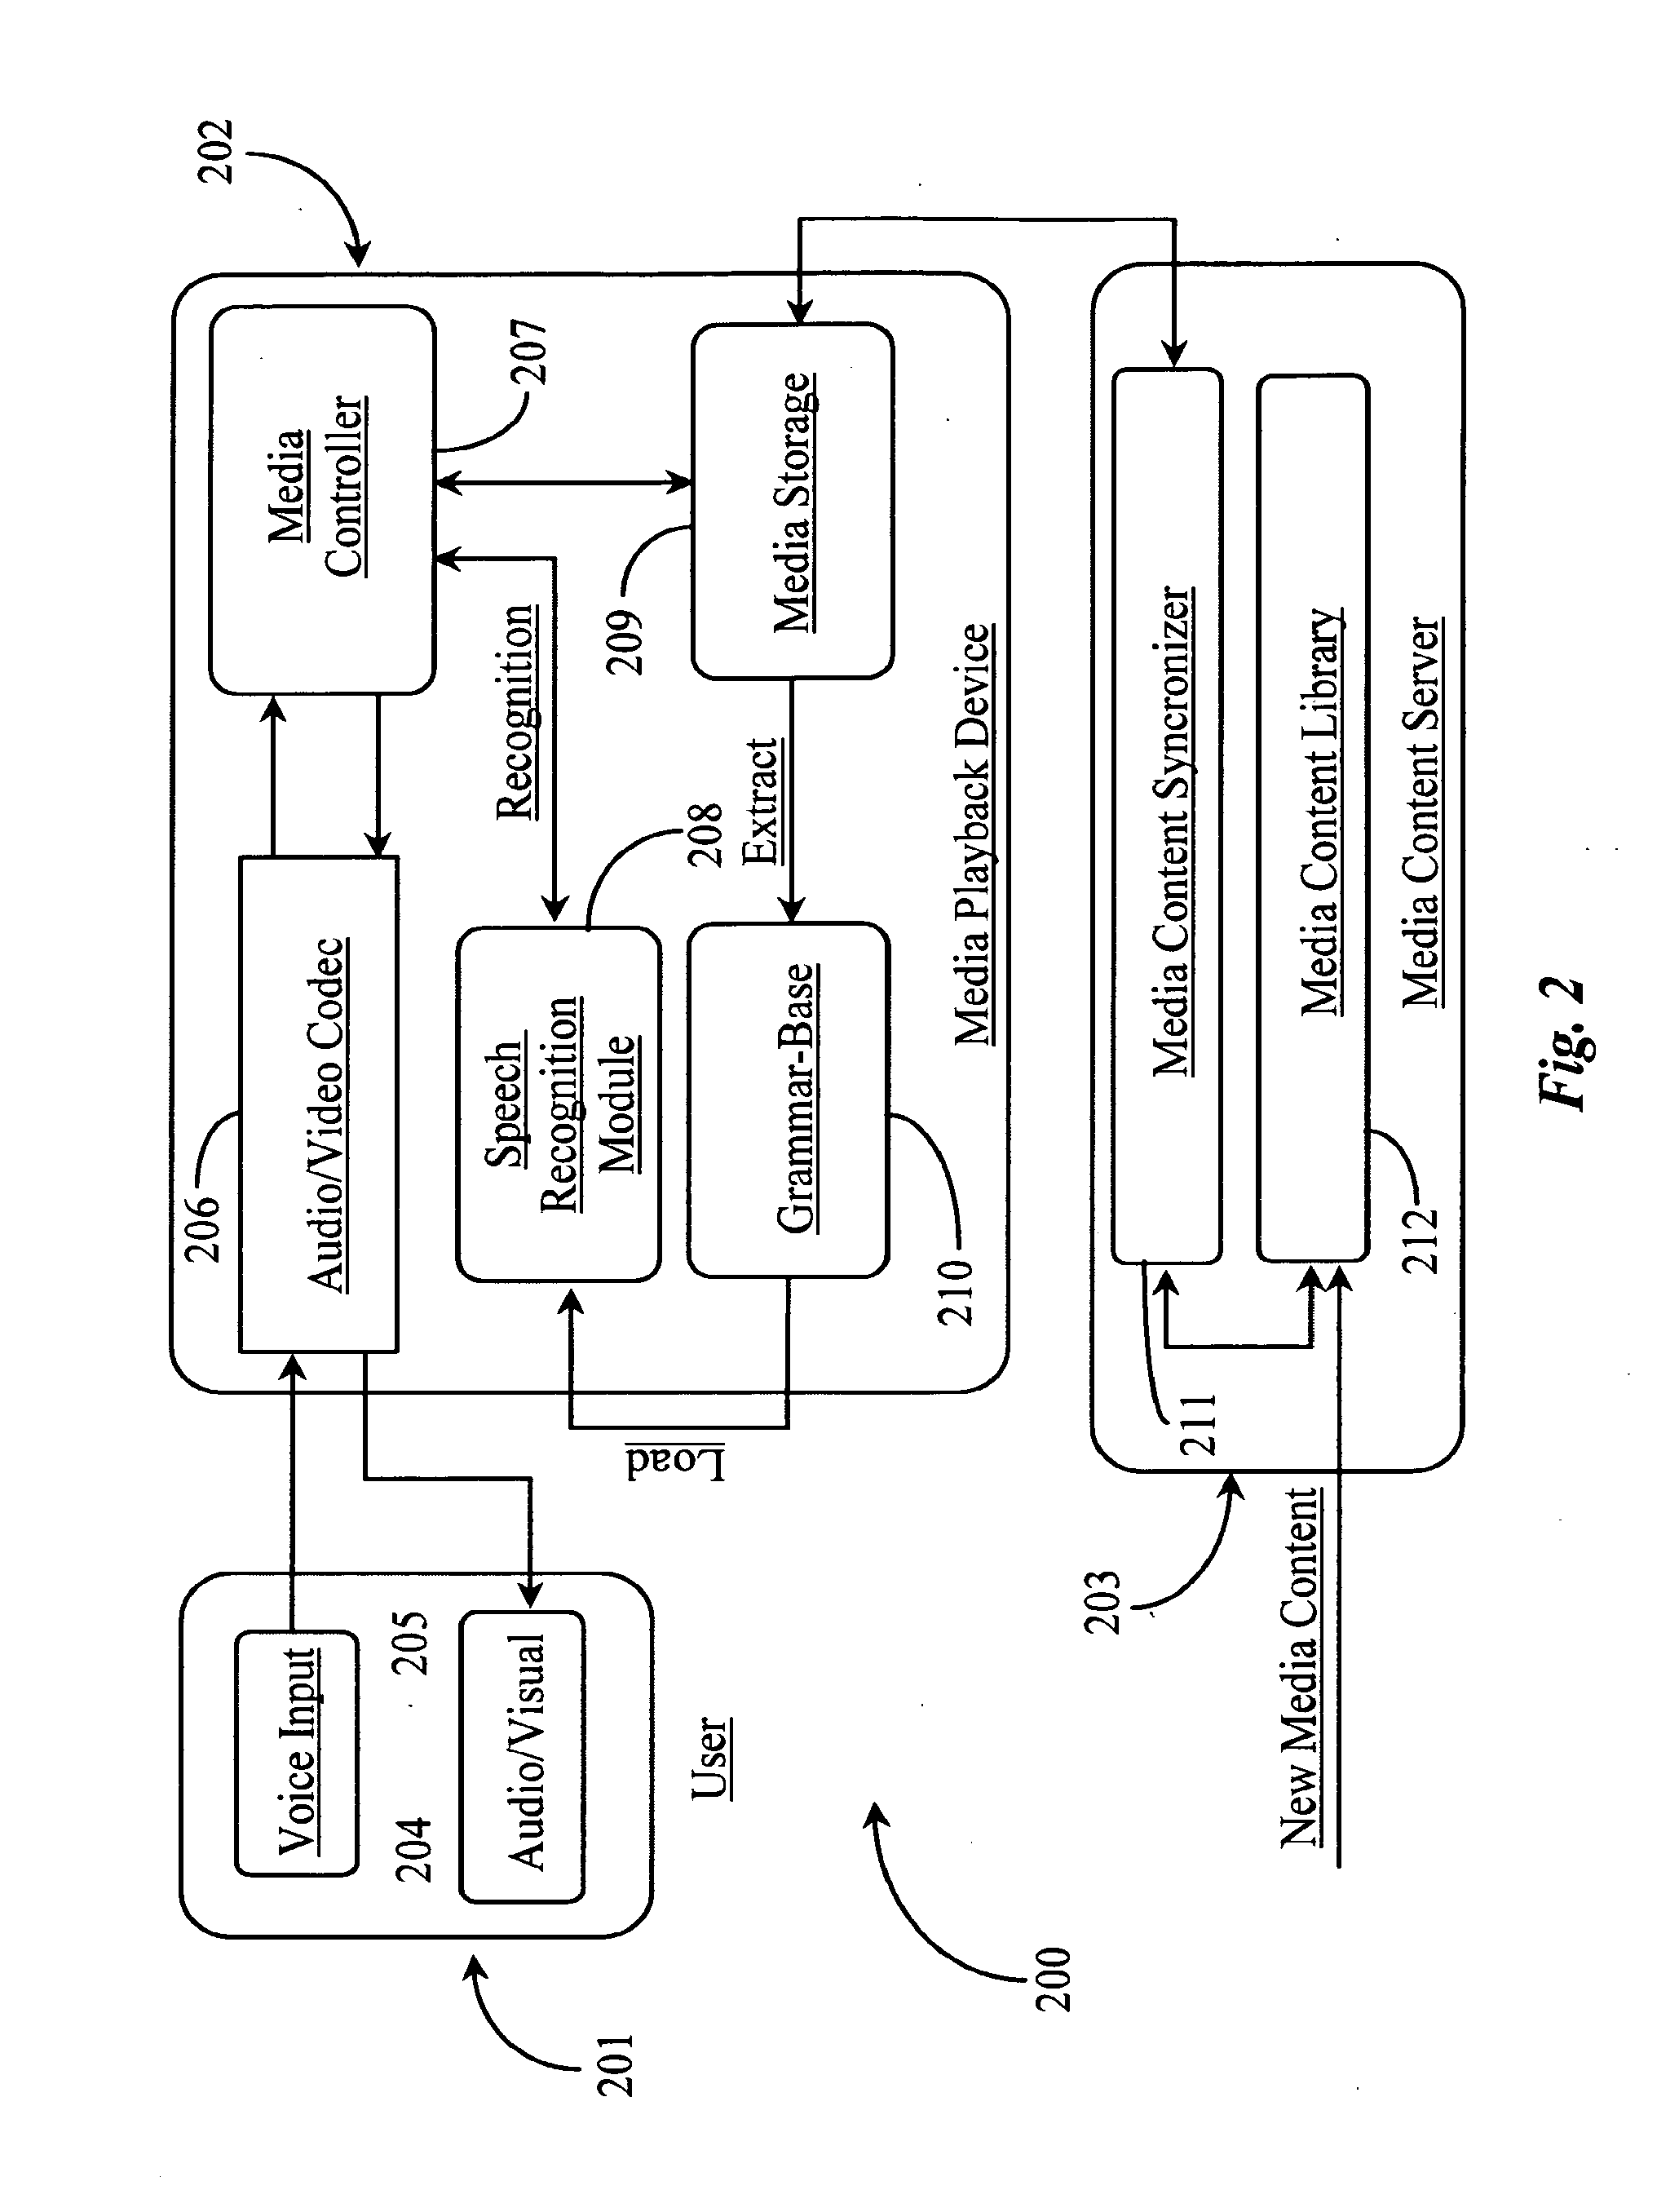 Methods for synchronous and asynchronous voice-enabled content selection and content synchronization for a mobile or fixed multimedia station